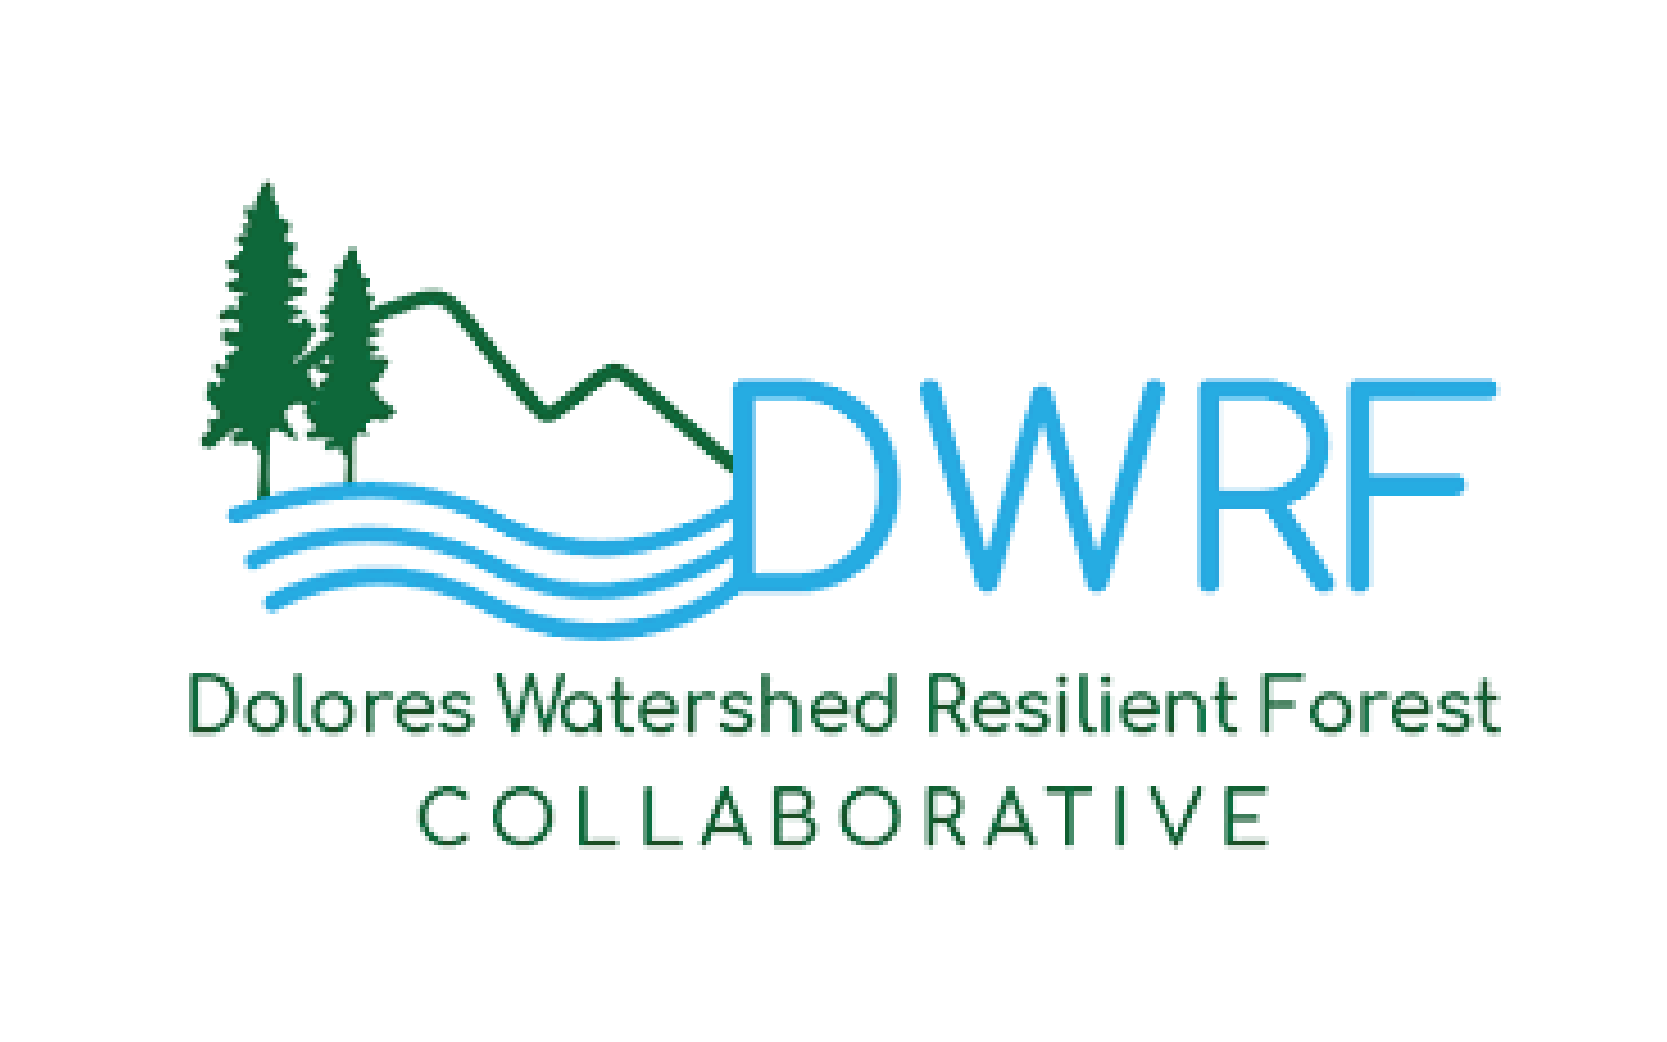 Dolores Watershed Resilient Forest logo